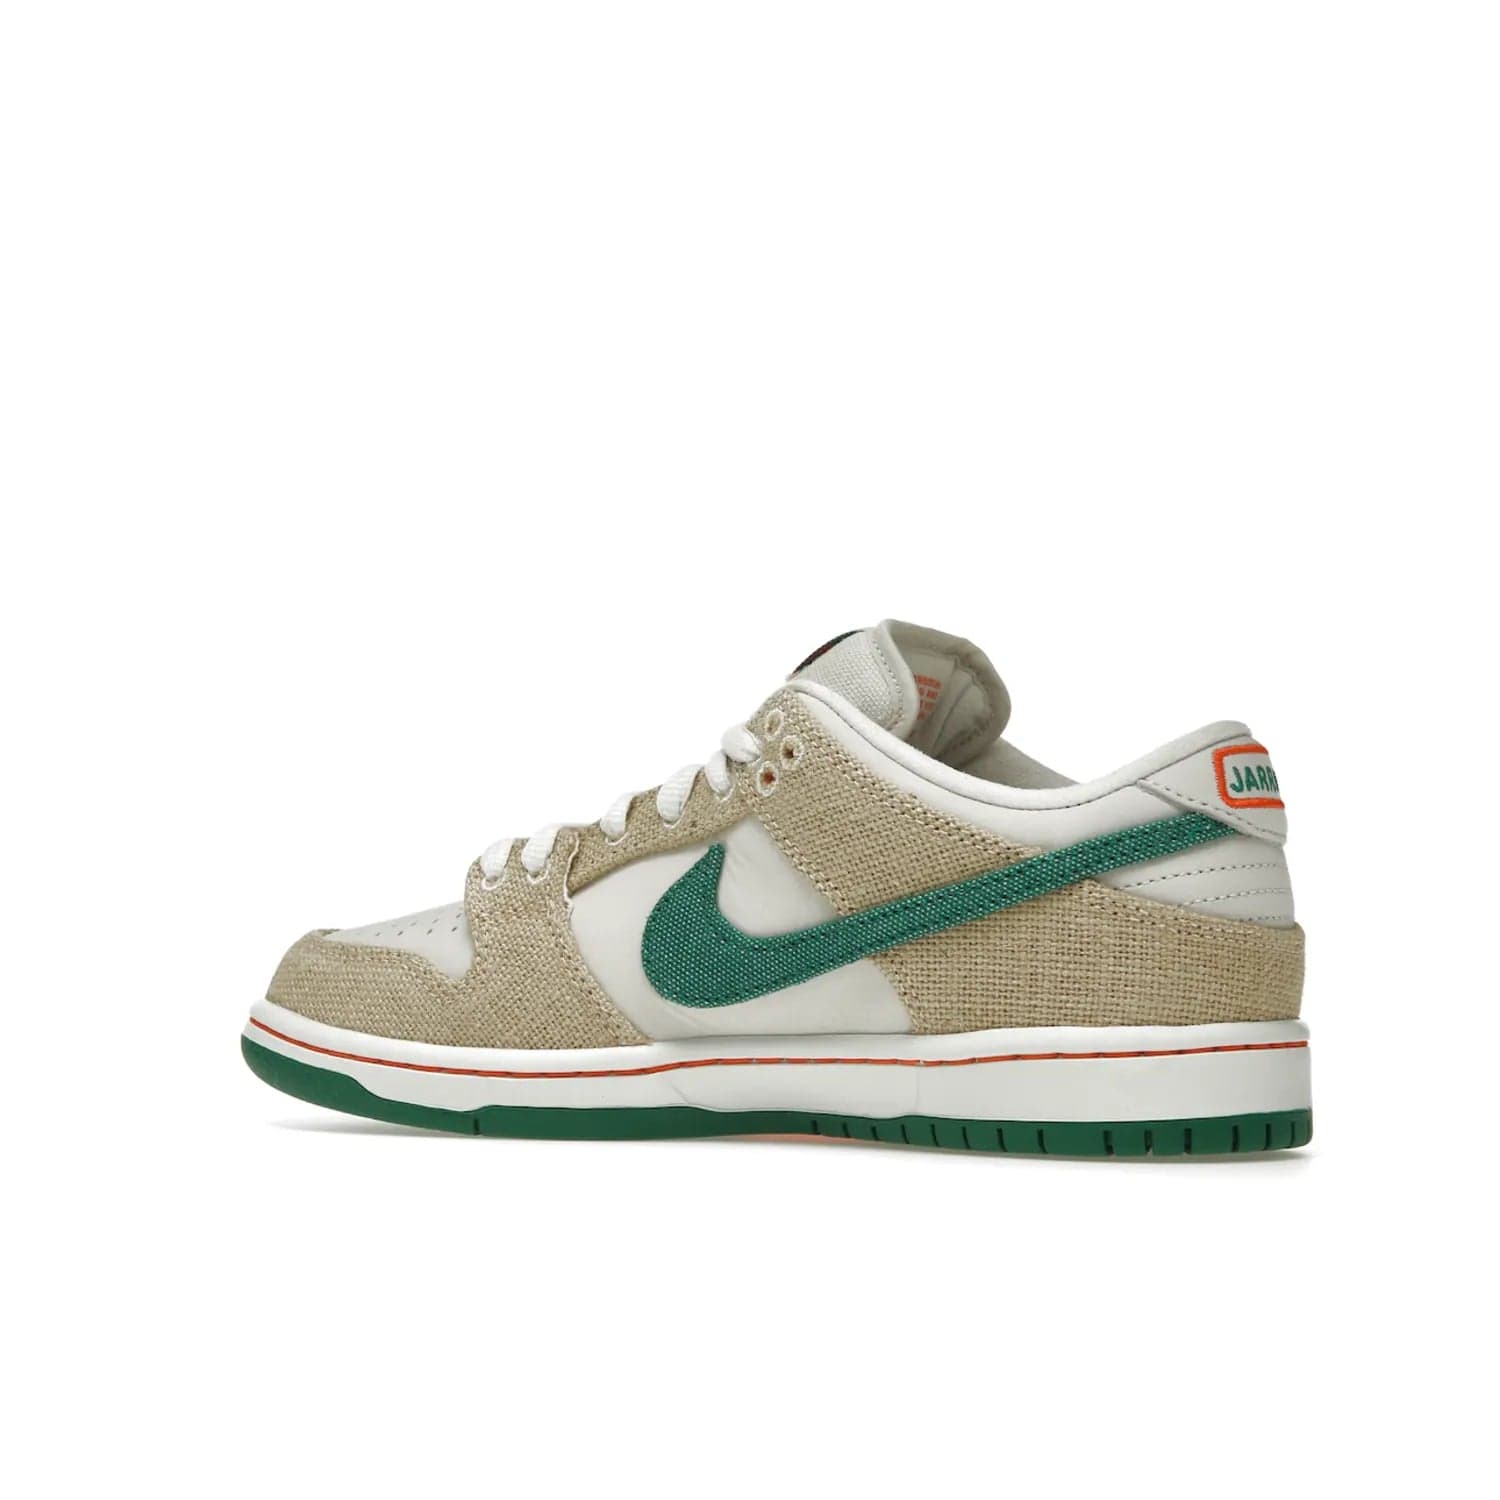 Nike SB Dunk Low Jarritos - Image 22 - Only at www.BallersClubKickz.com - Shop limited edition Nike SB Dunk Low Jarritos! Crafted with white leather and tear-away canvas materials with green accents. Includes orange, green, and white laces to customize your look. Available now.